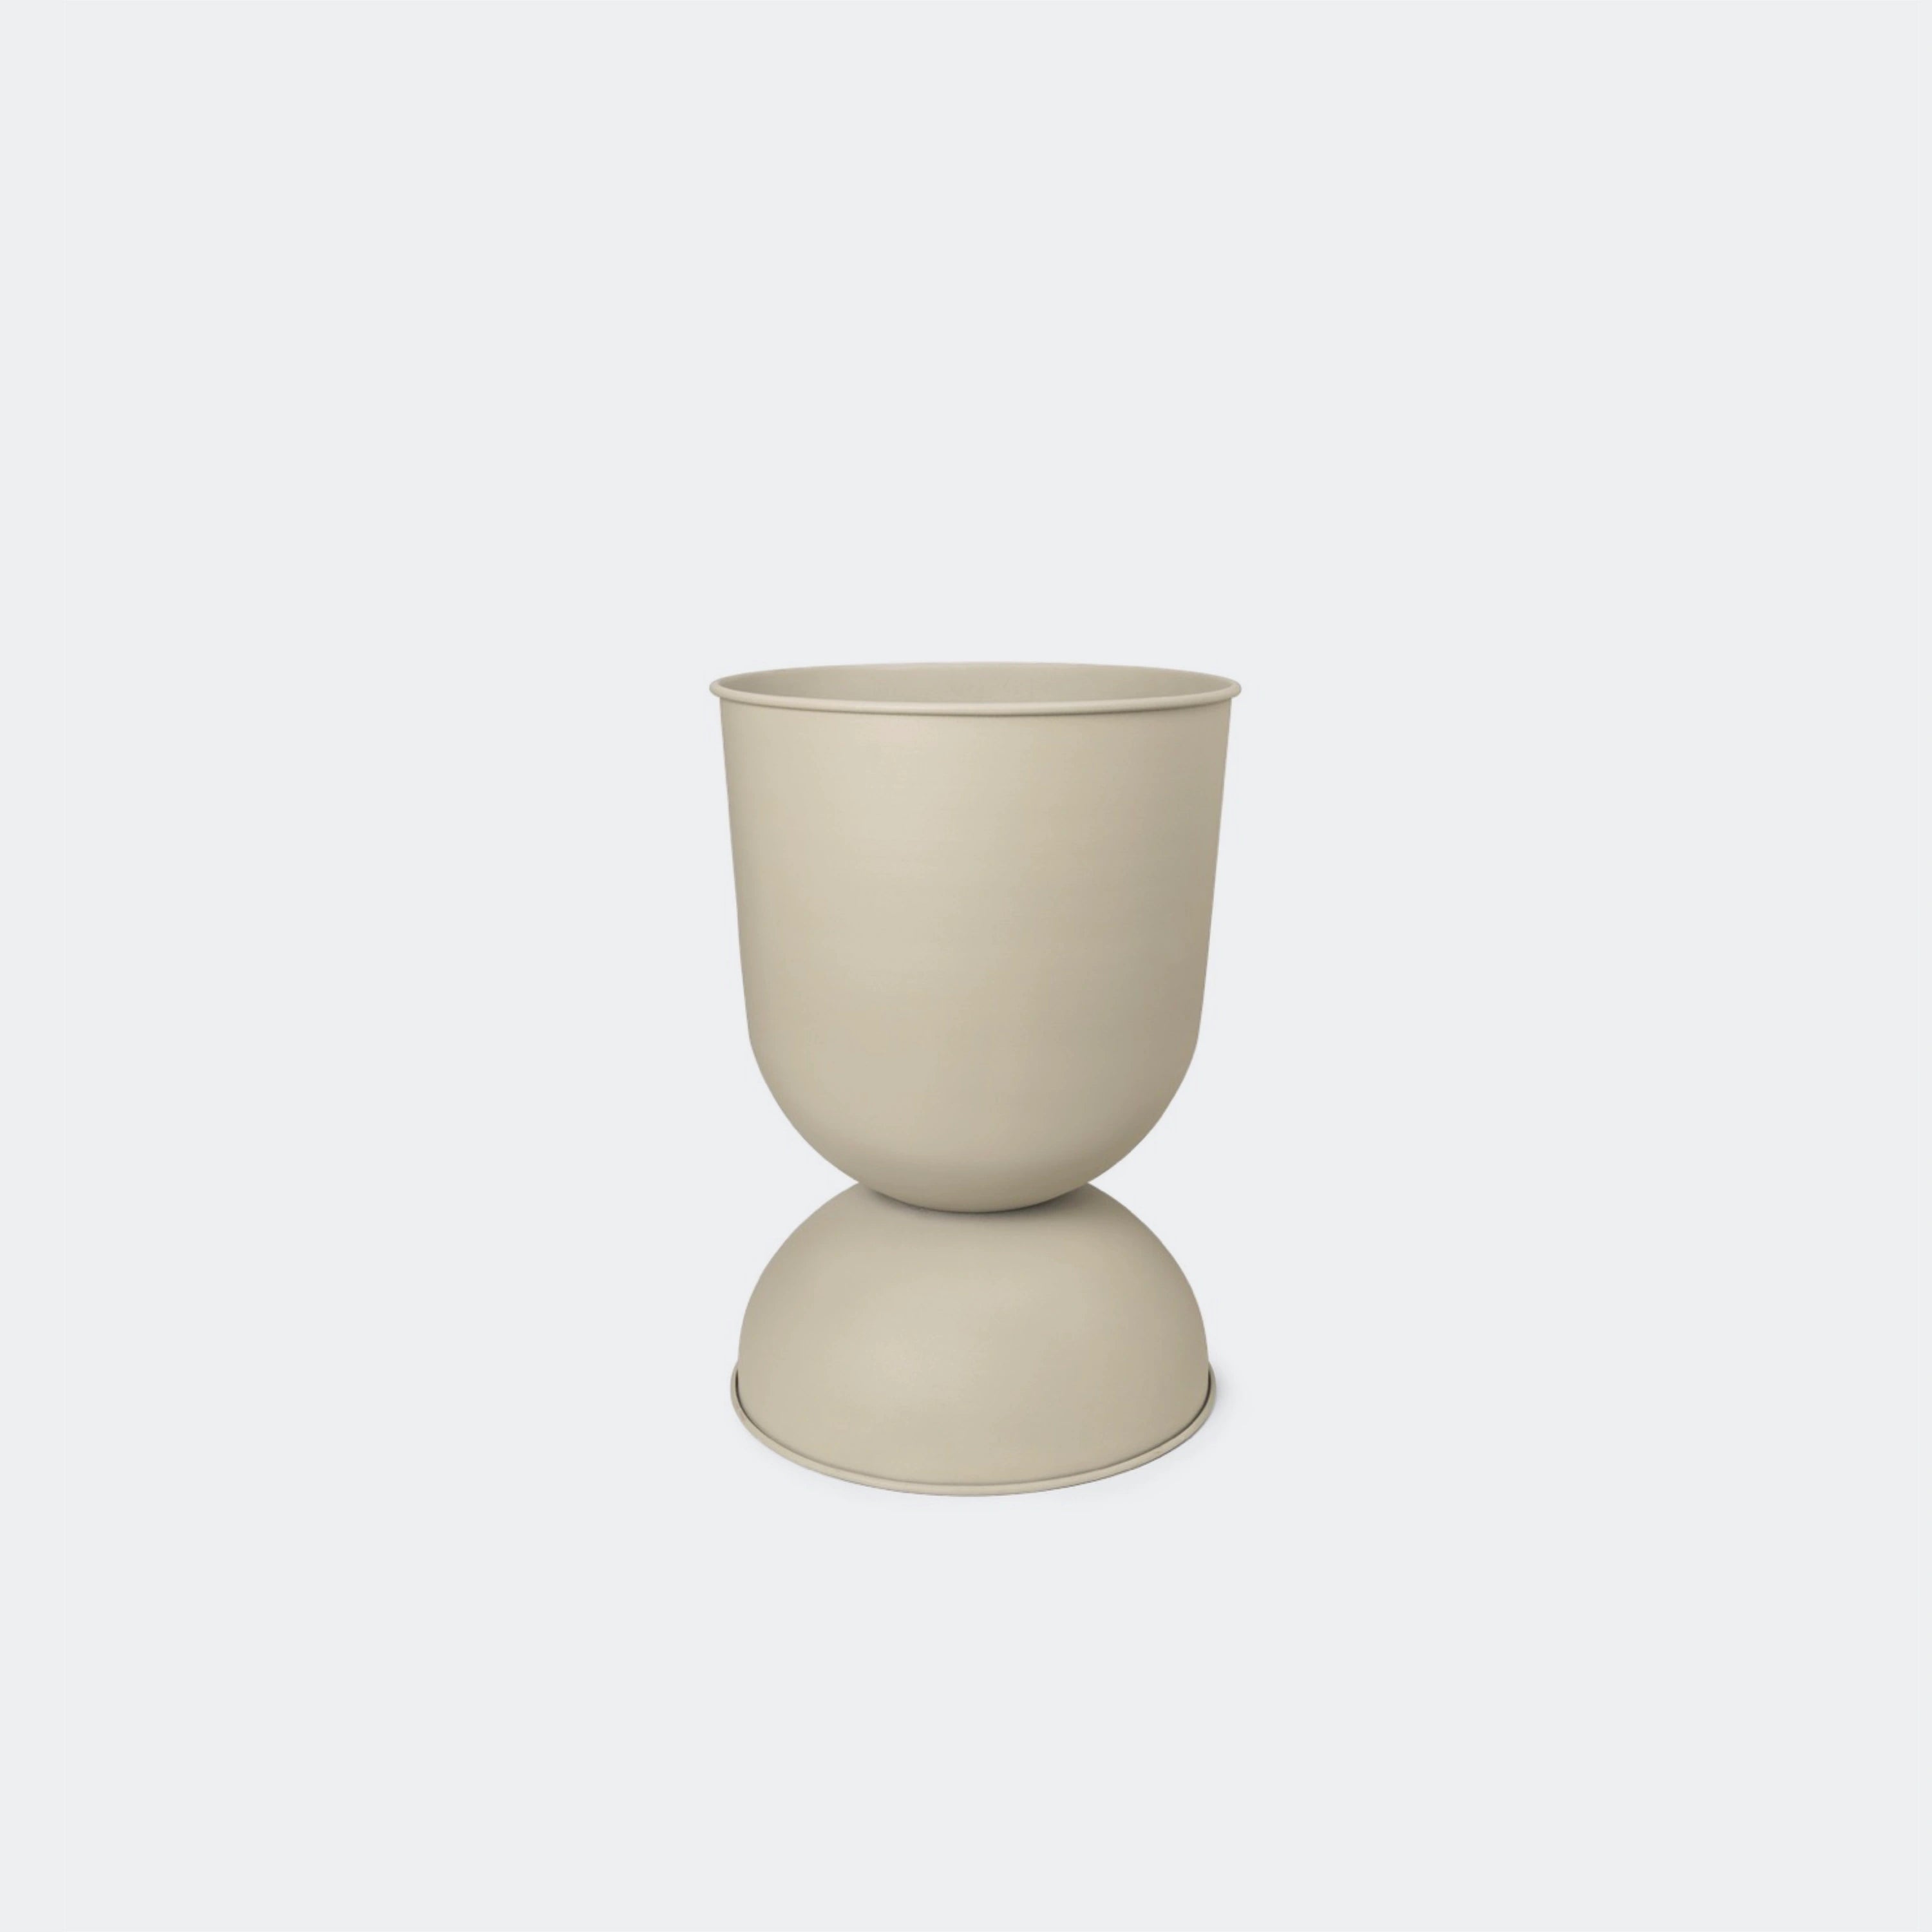 Ferm Living Hourglass Pot, Cashmere Small - KANSO#Select Size_Small